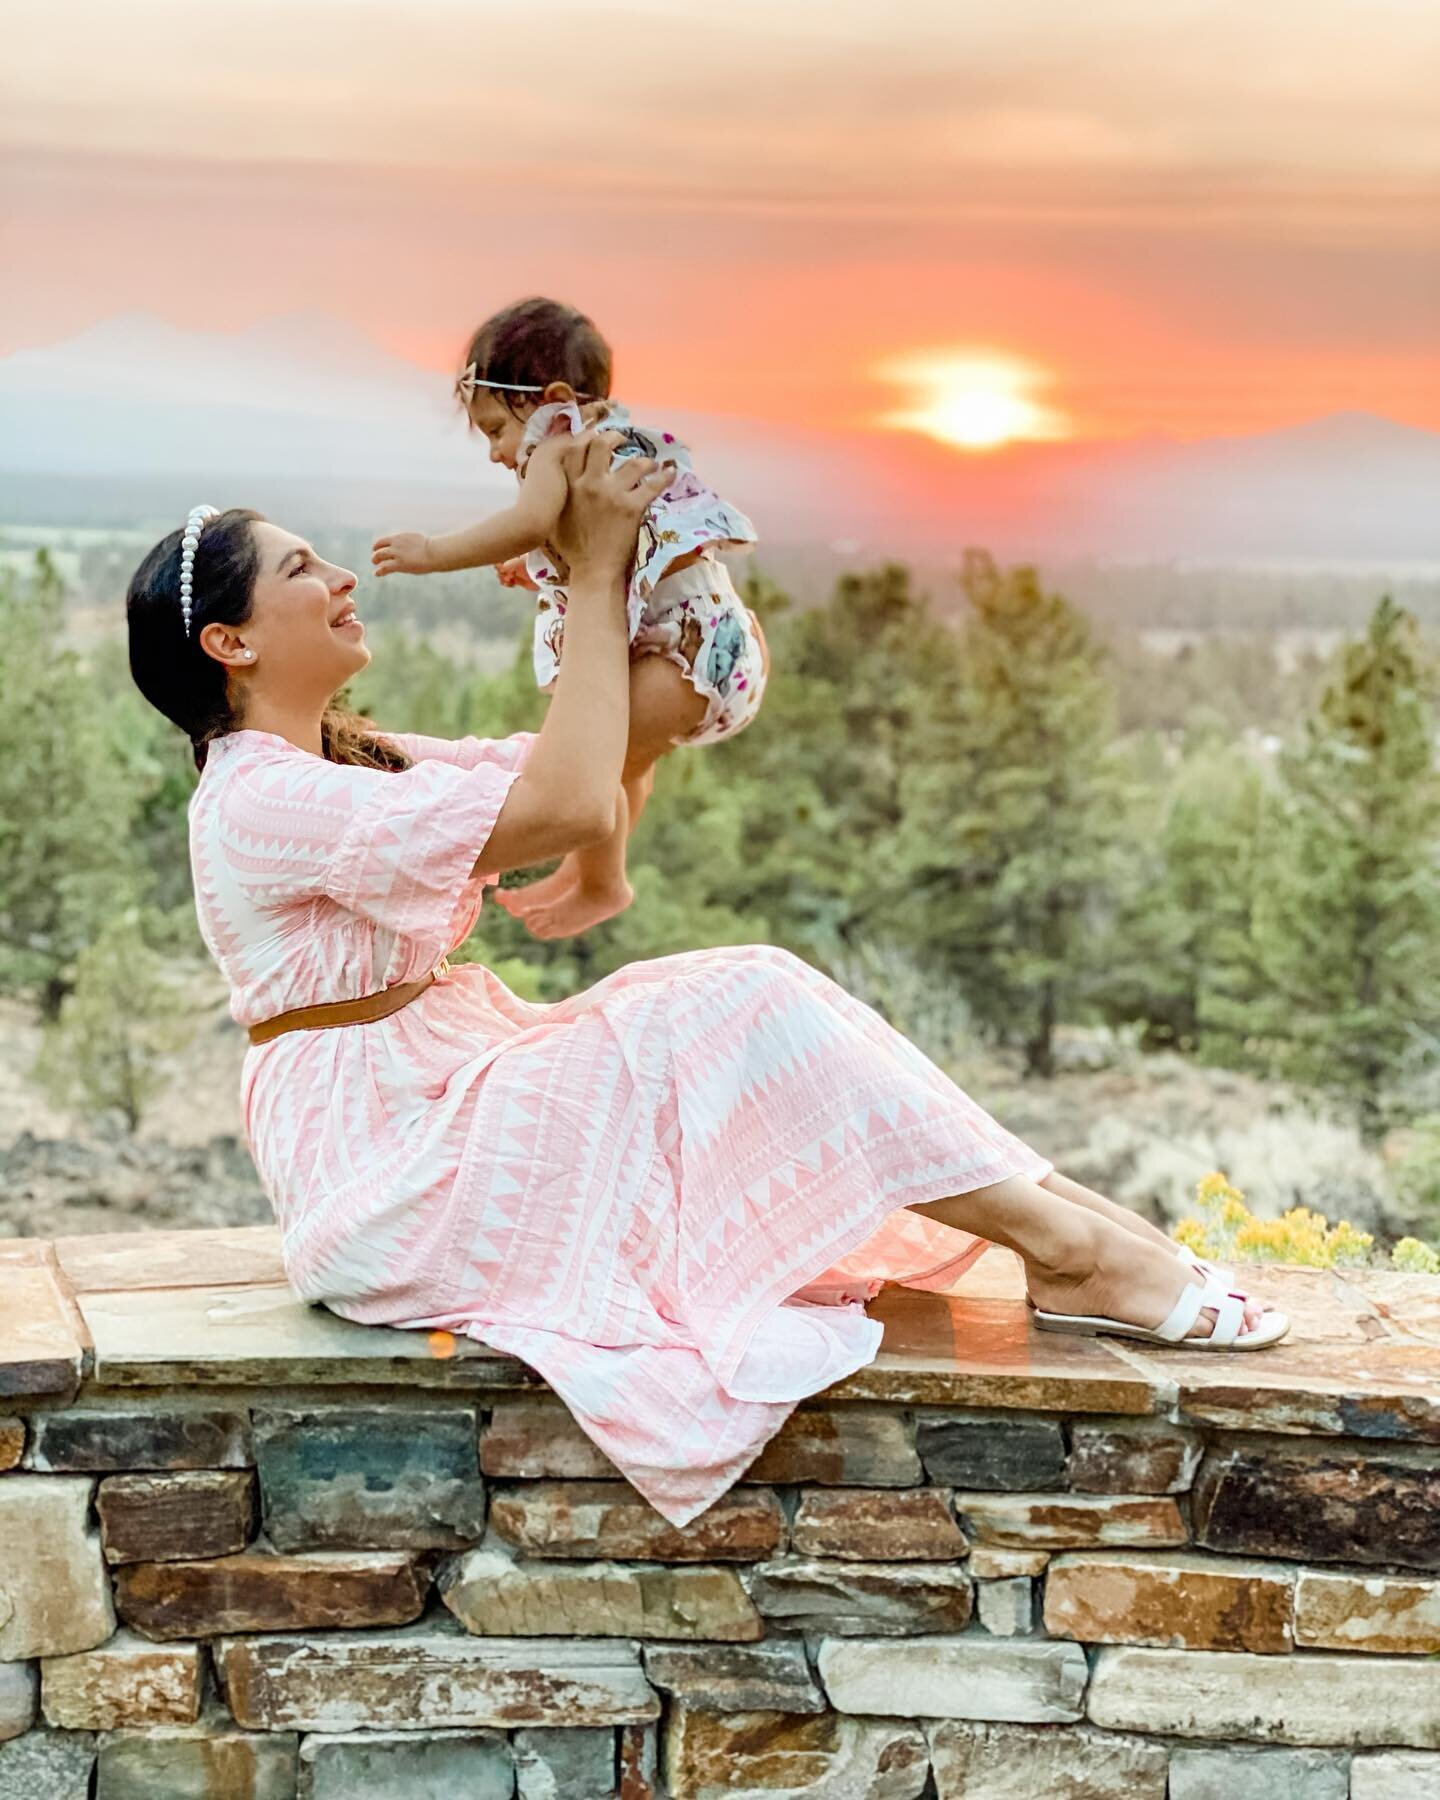 Last night&rsquo;s sunset was unreal&mdash; the kind that fills your soul. I soaked up this peanut during golden hour. Can&rsquo;t believe she&rsquo;s about to be 9 months old already. 😭 if you&rsquo;ve been watching my stories, you know that we&rsq